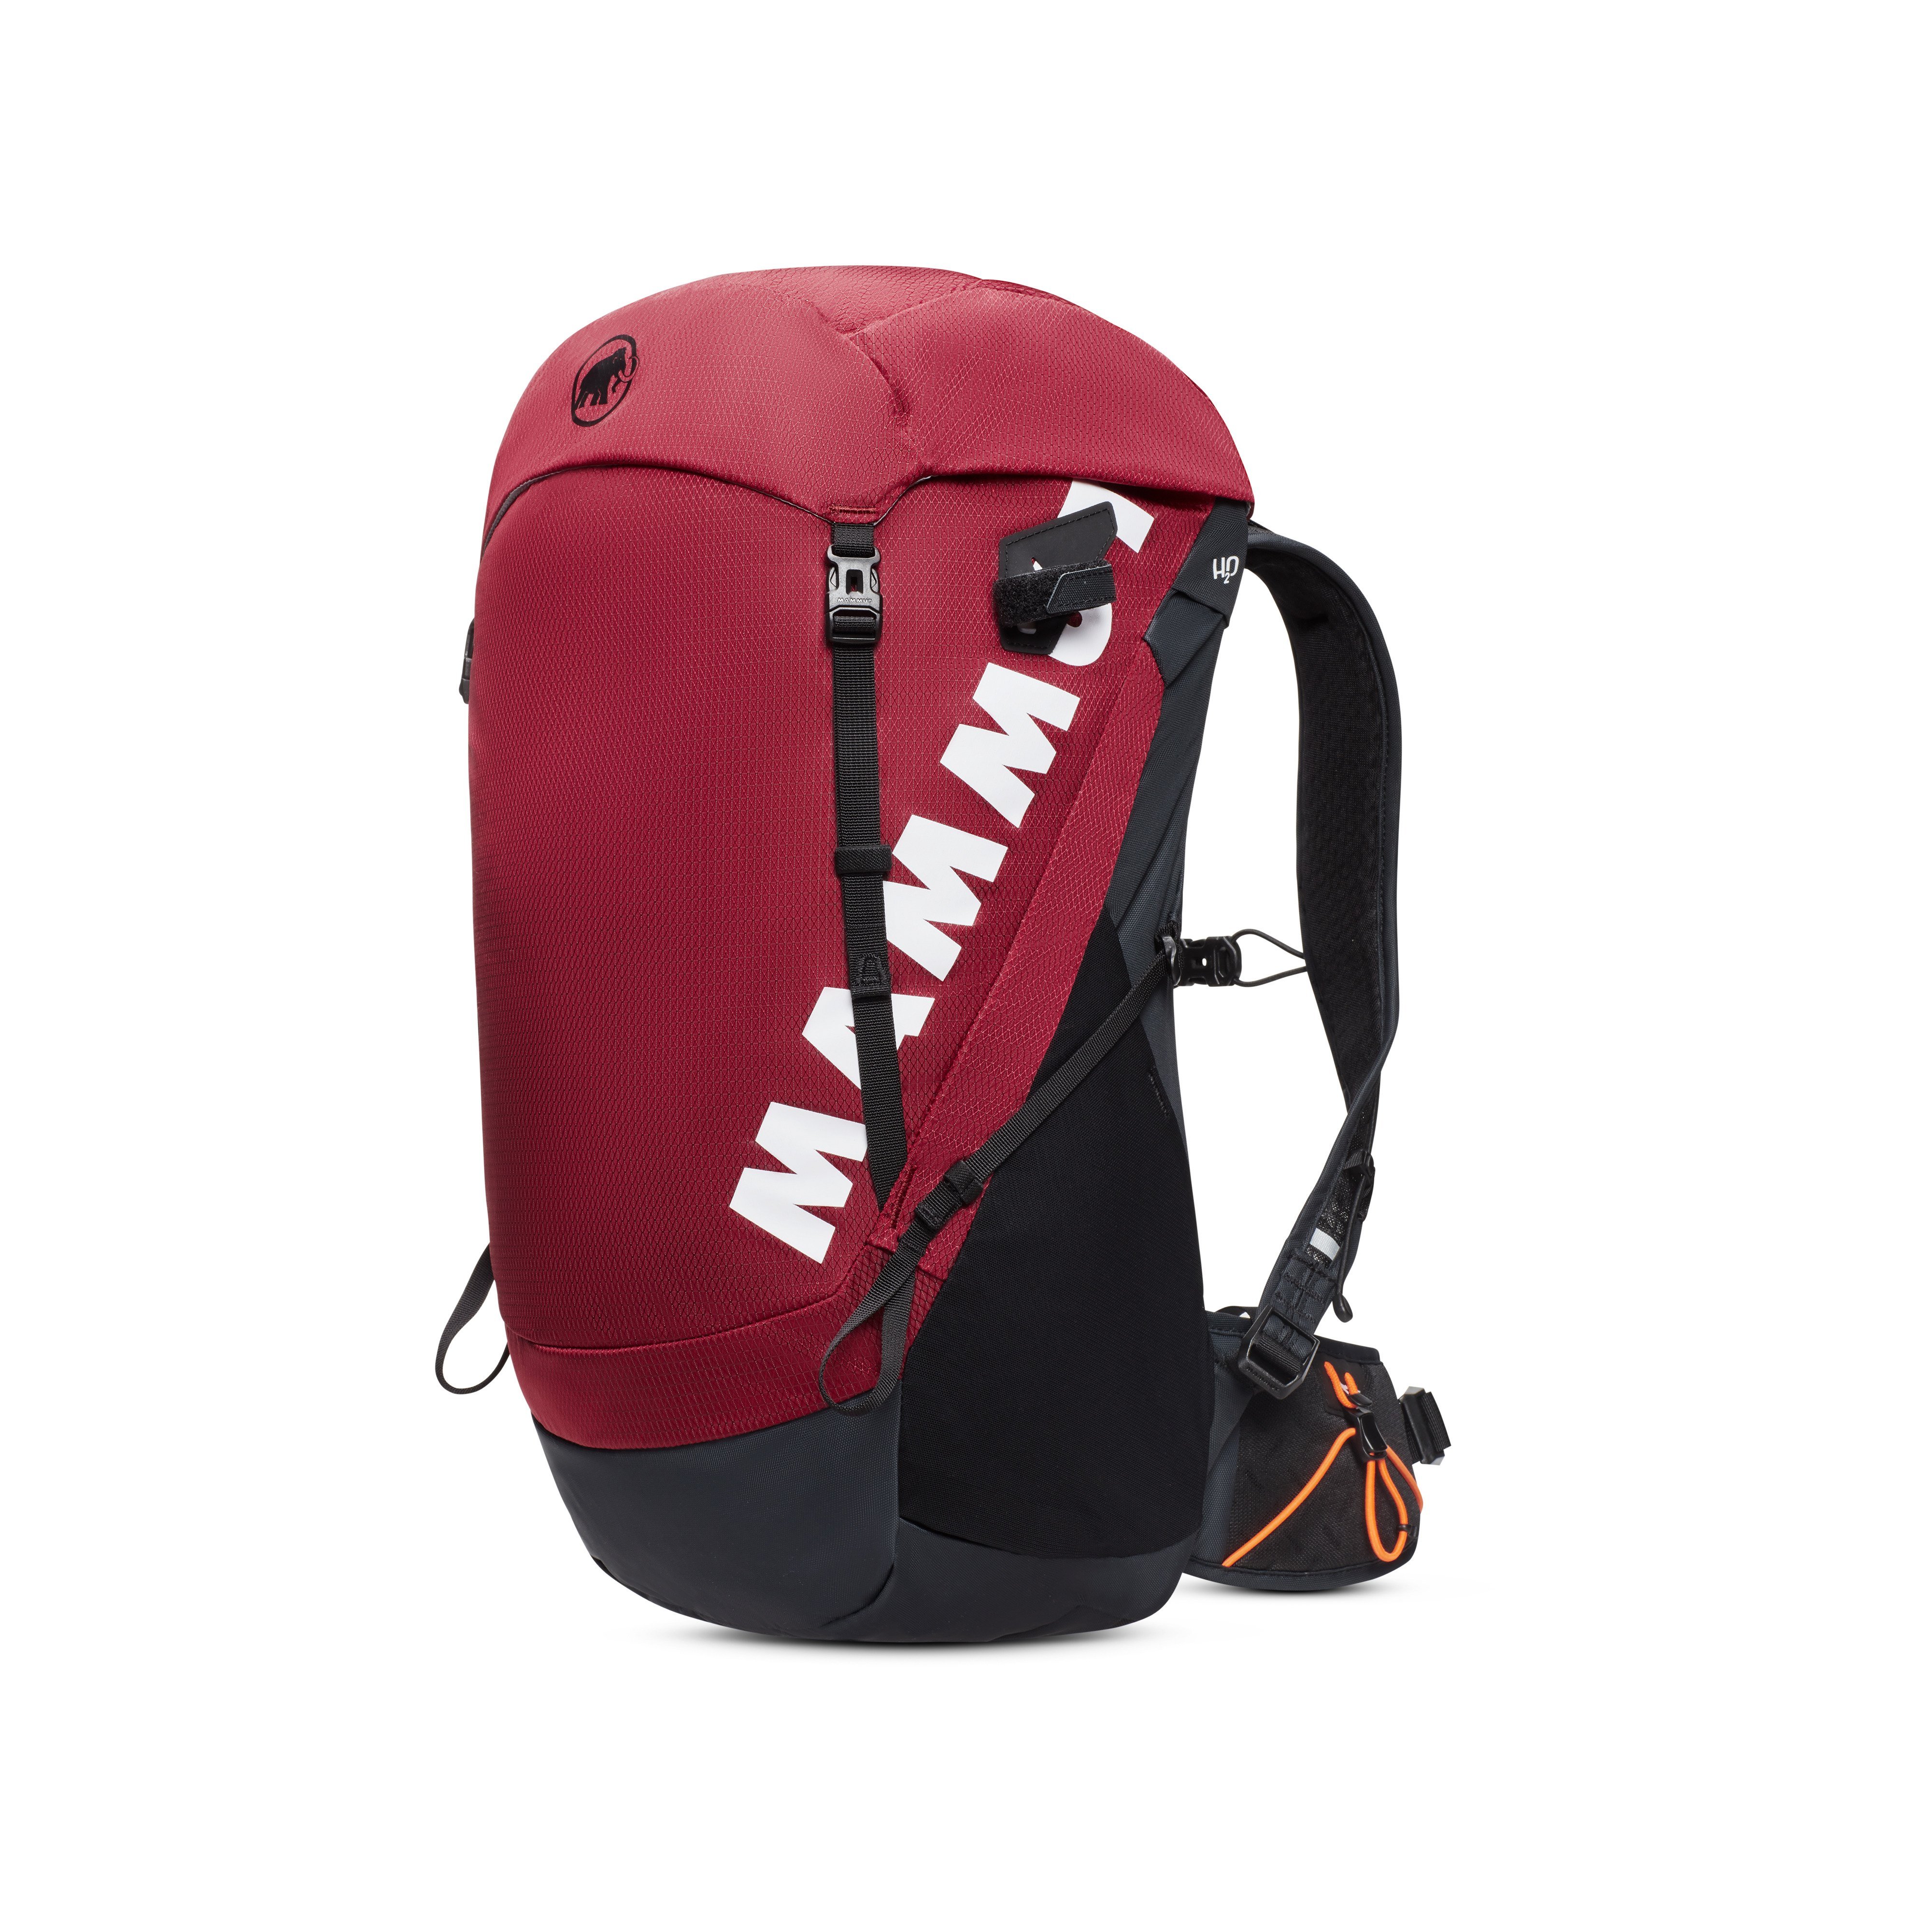 Ducan 24 Women - blood red-black, 24 L product image